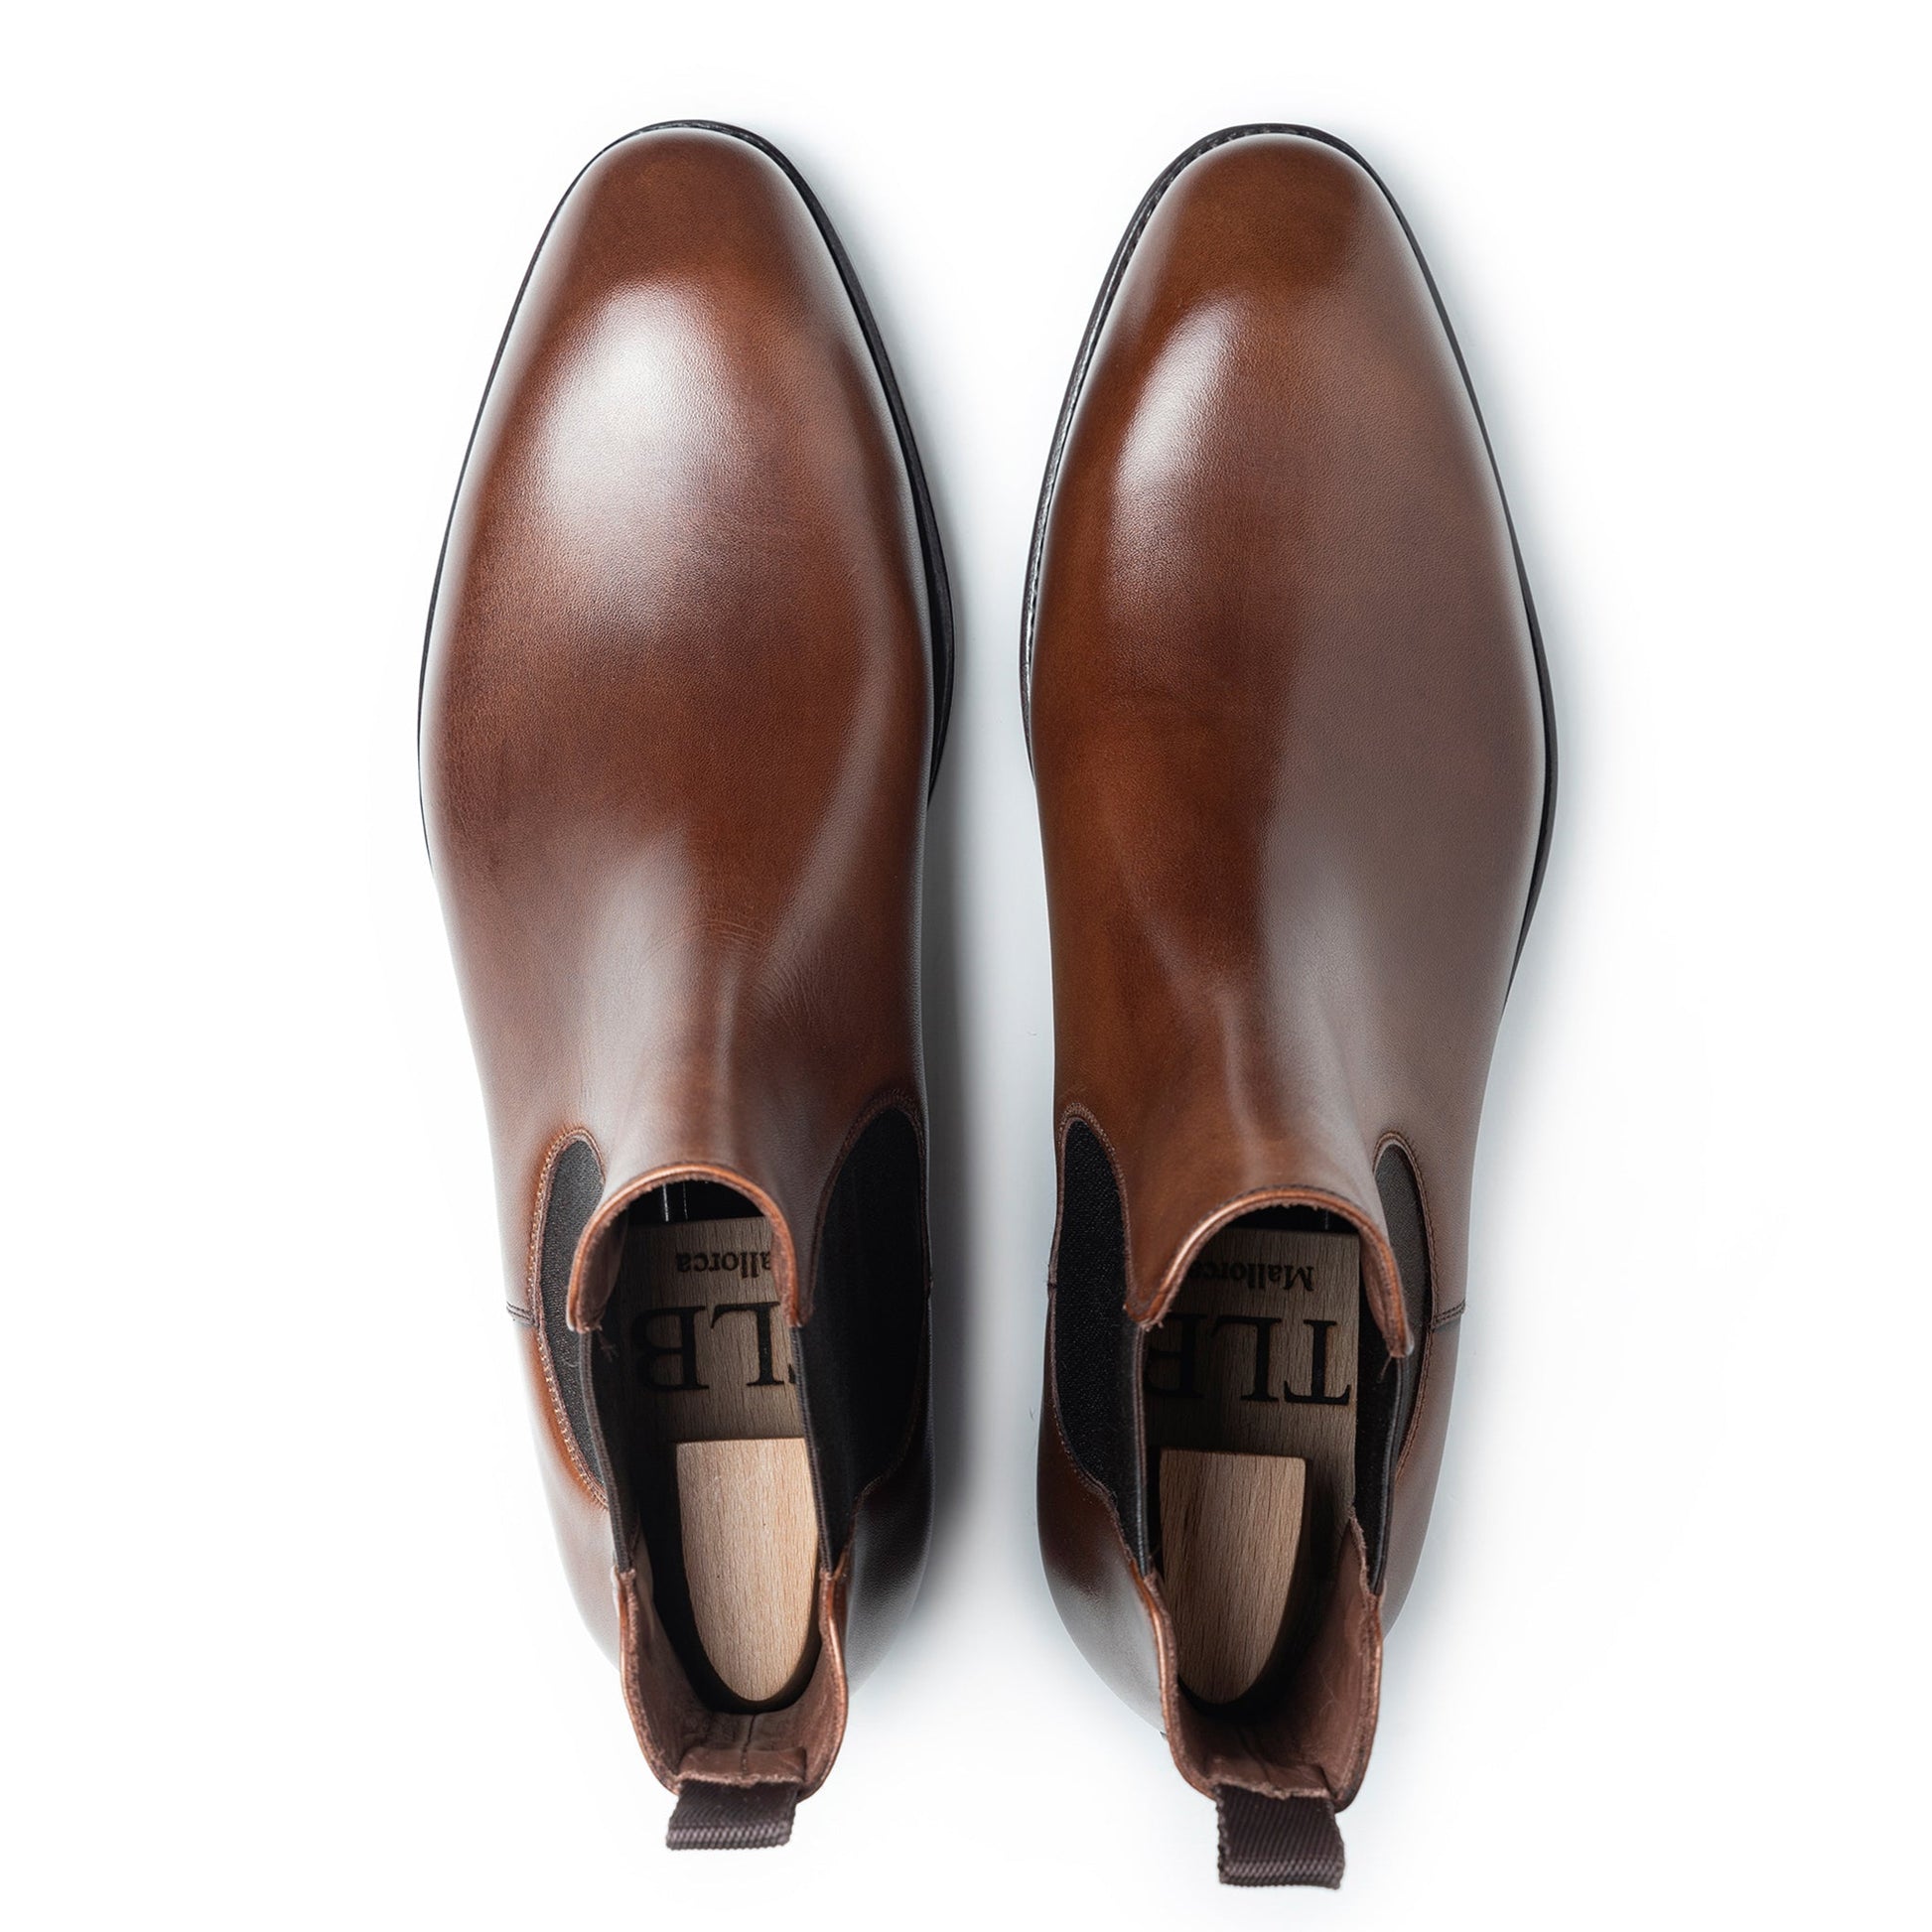 TLB Mallorca leather shoes - Men's boots 